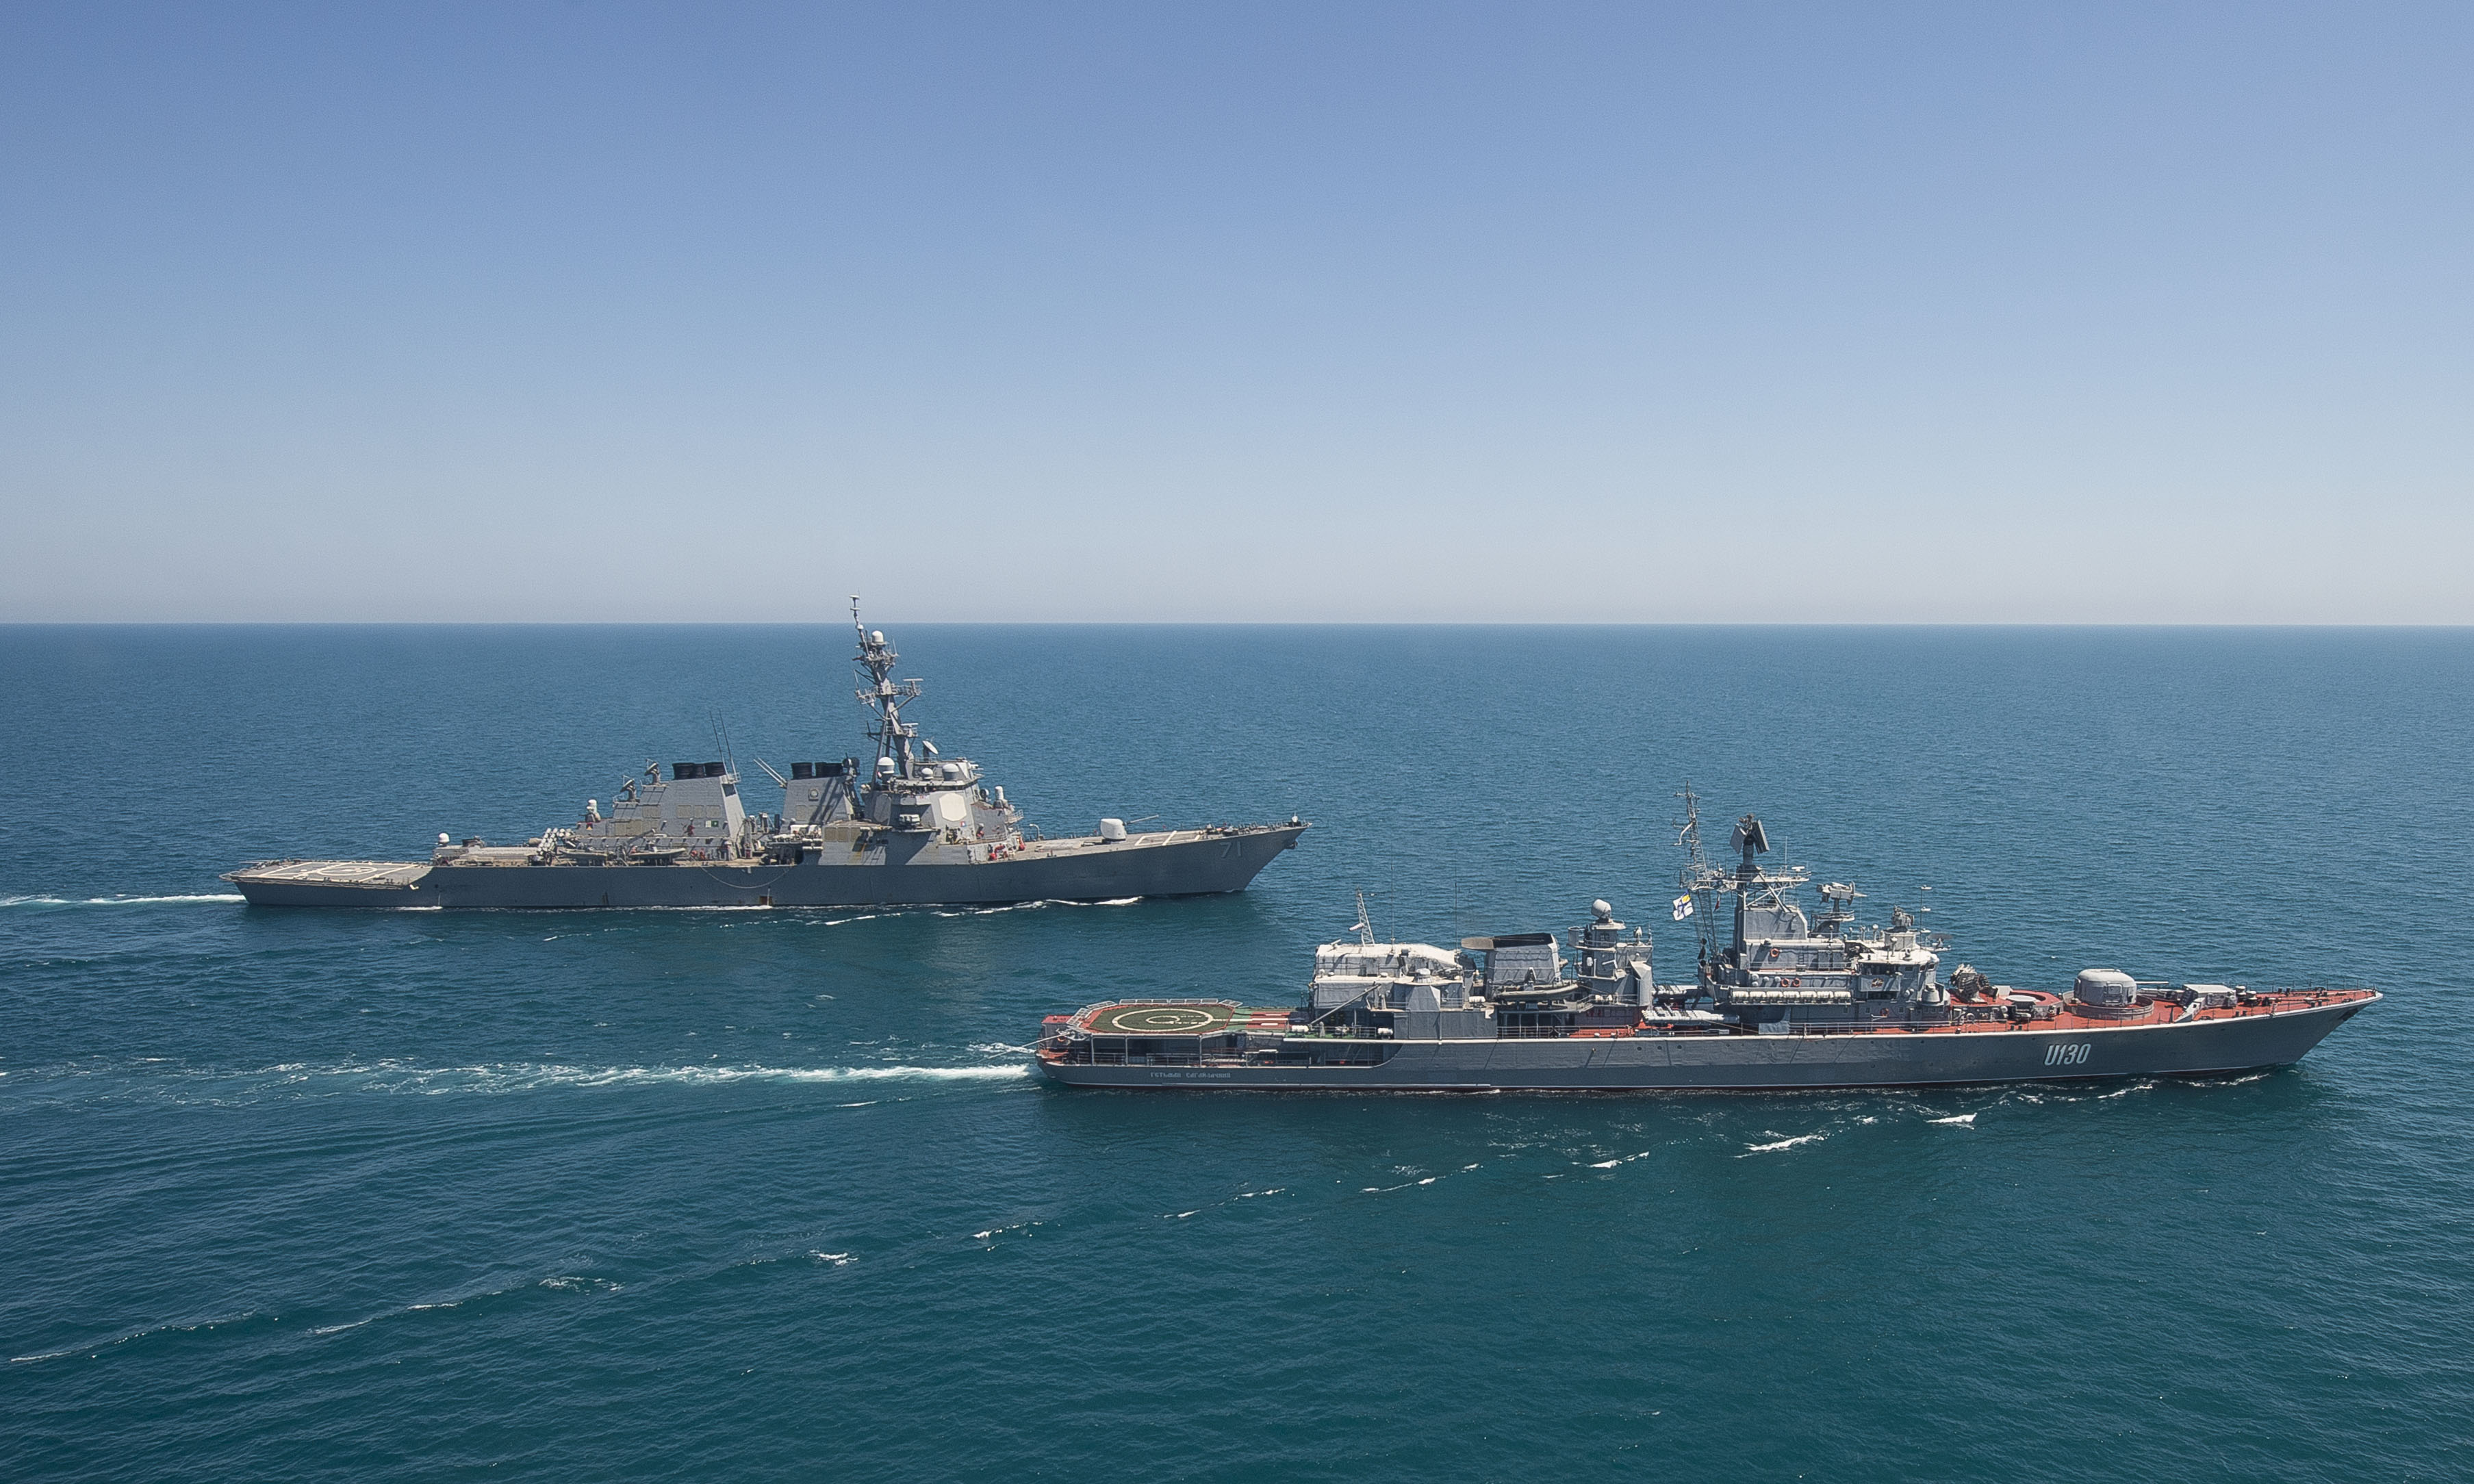 USS Ross (DDG-71), left, transits the Black Sea with the Ukranian navy frigate Hetman Sahaydachniy (U 130) during an underway exercise on June 2, 2015. US Navy Photo